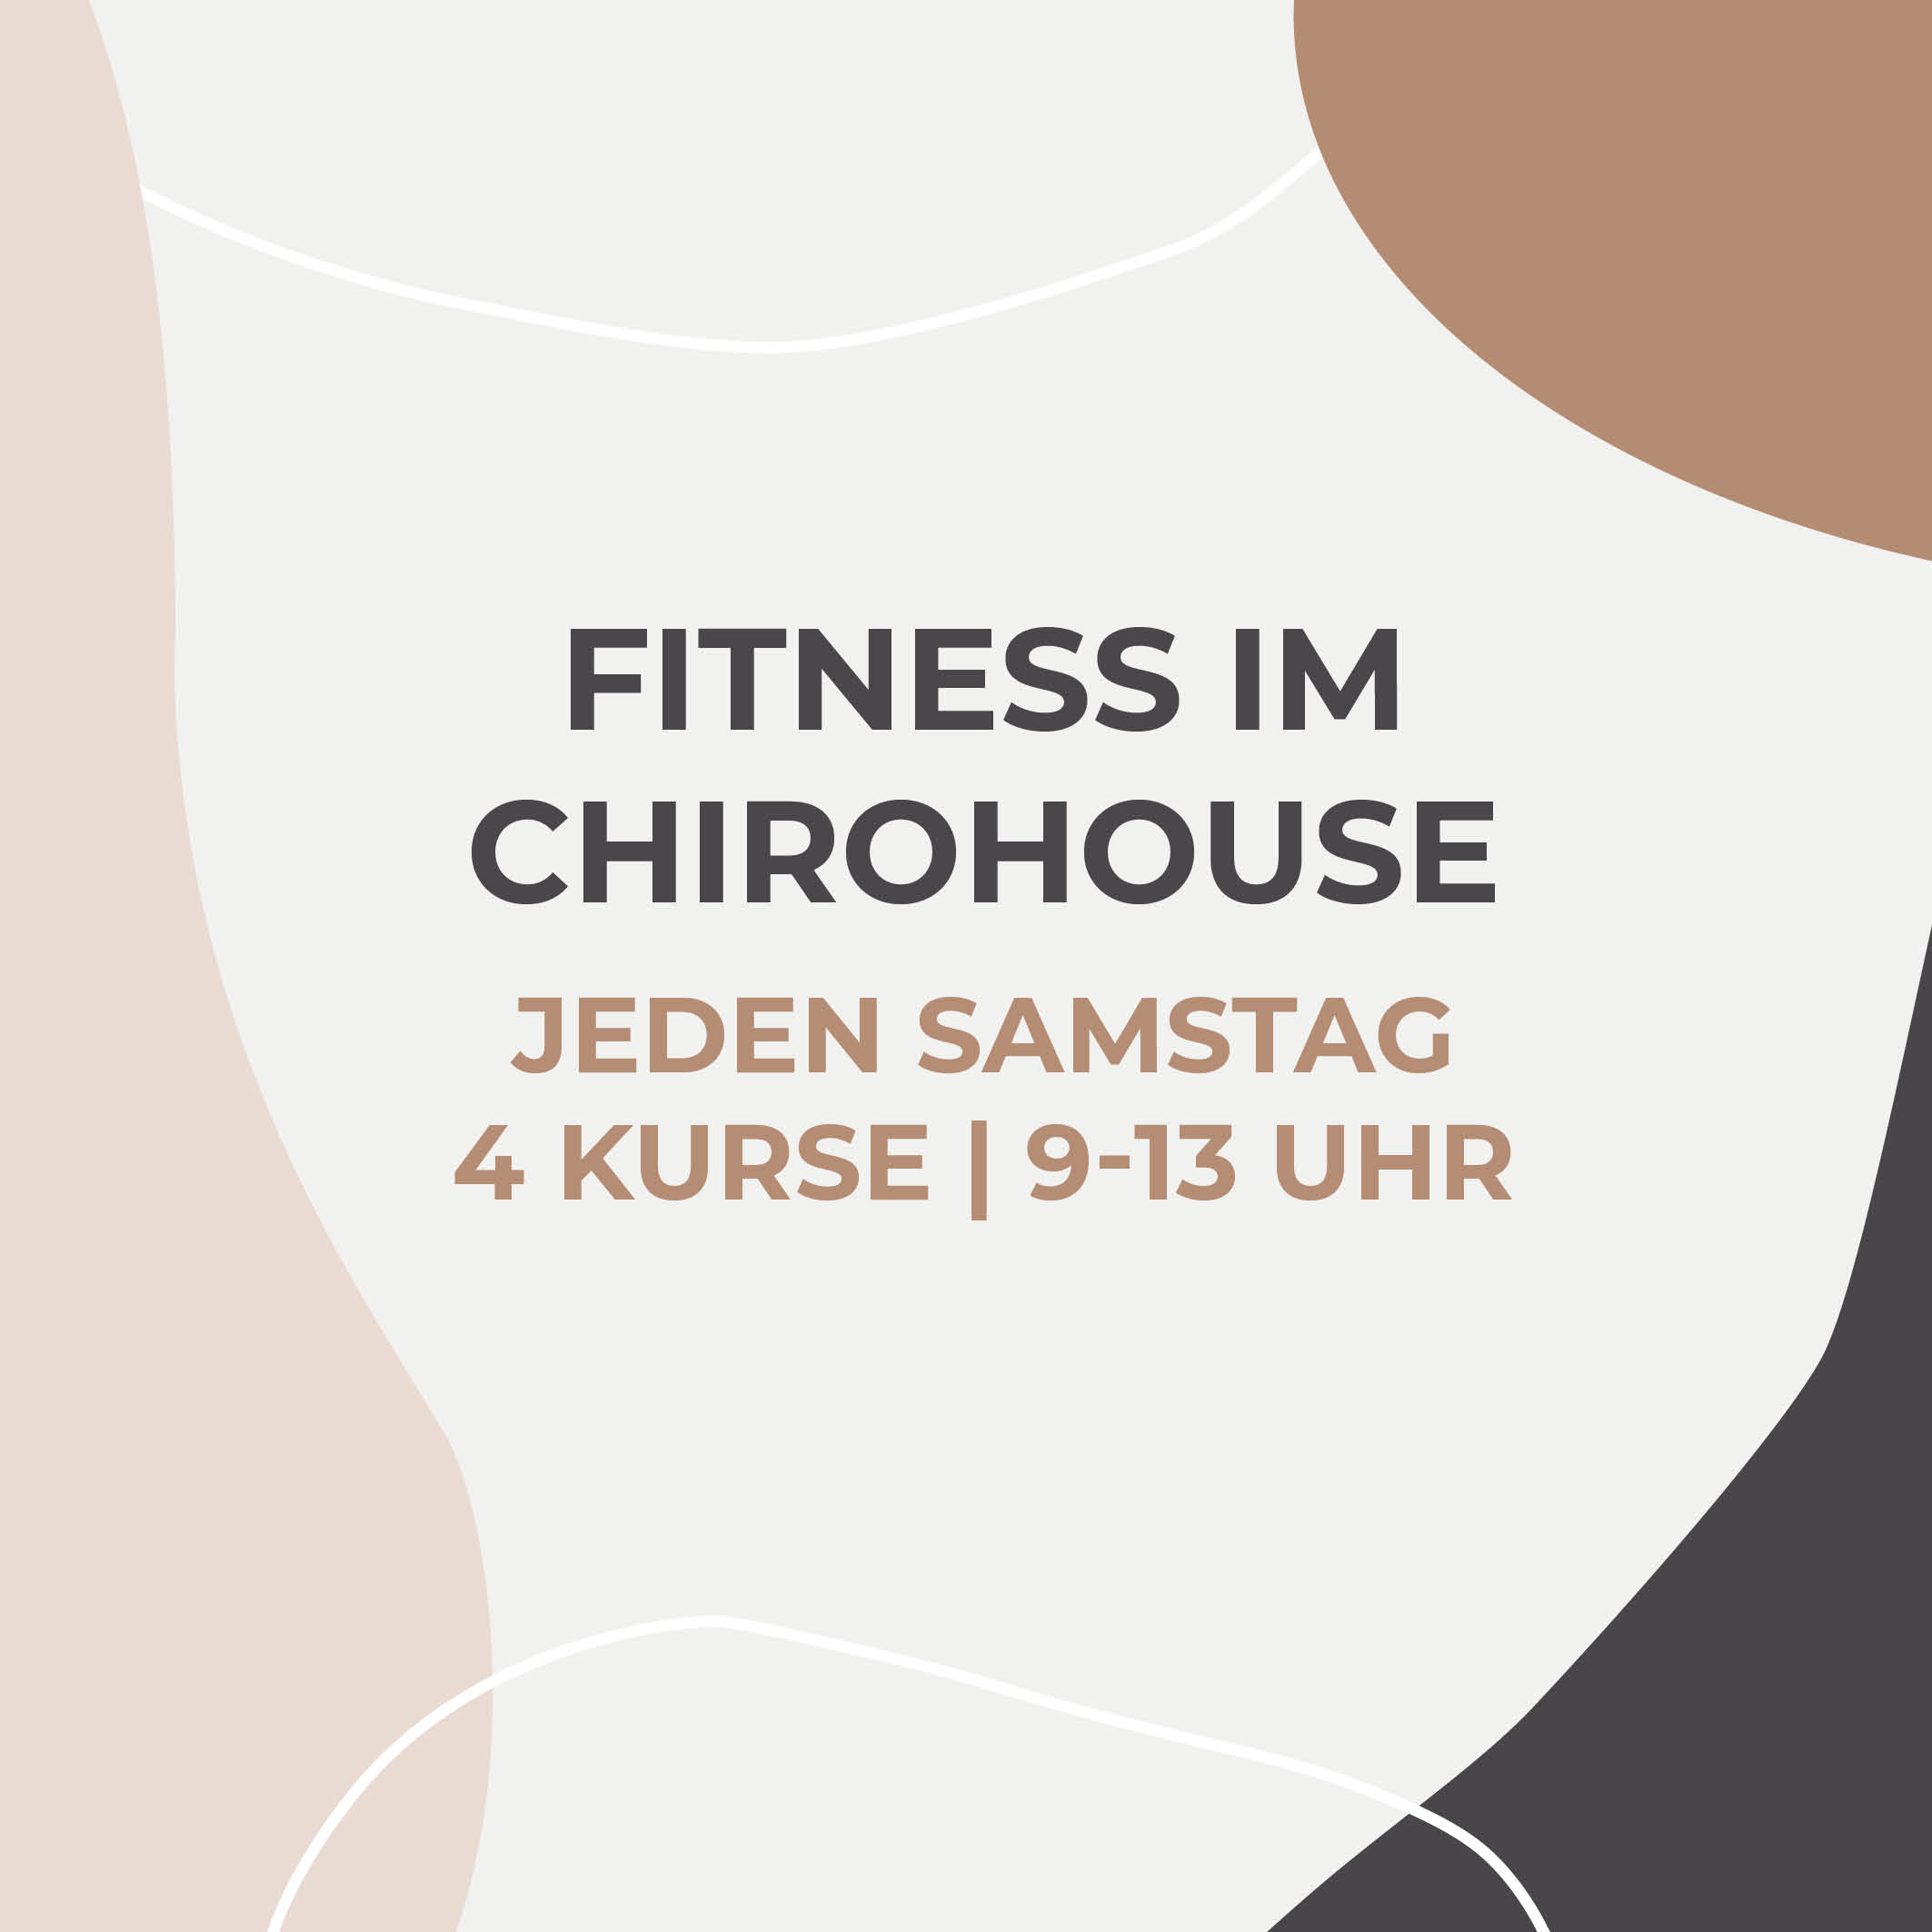 Chirohouse Chiropractic Berlin www.chirohouse.de - chiropractic, chiropractors, chirotherapists, innovative therapy, prevention, training - fitness at the ChiroHouse every Saturday - register now!